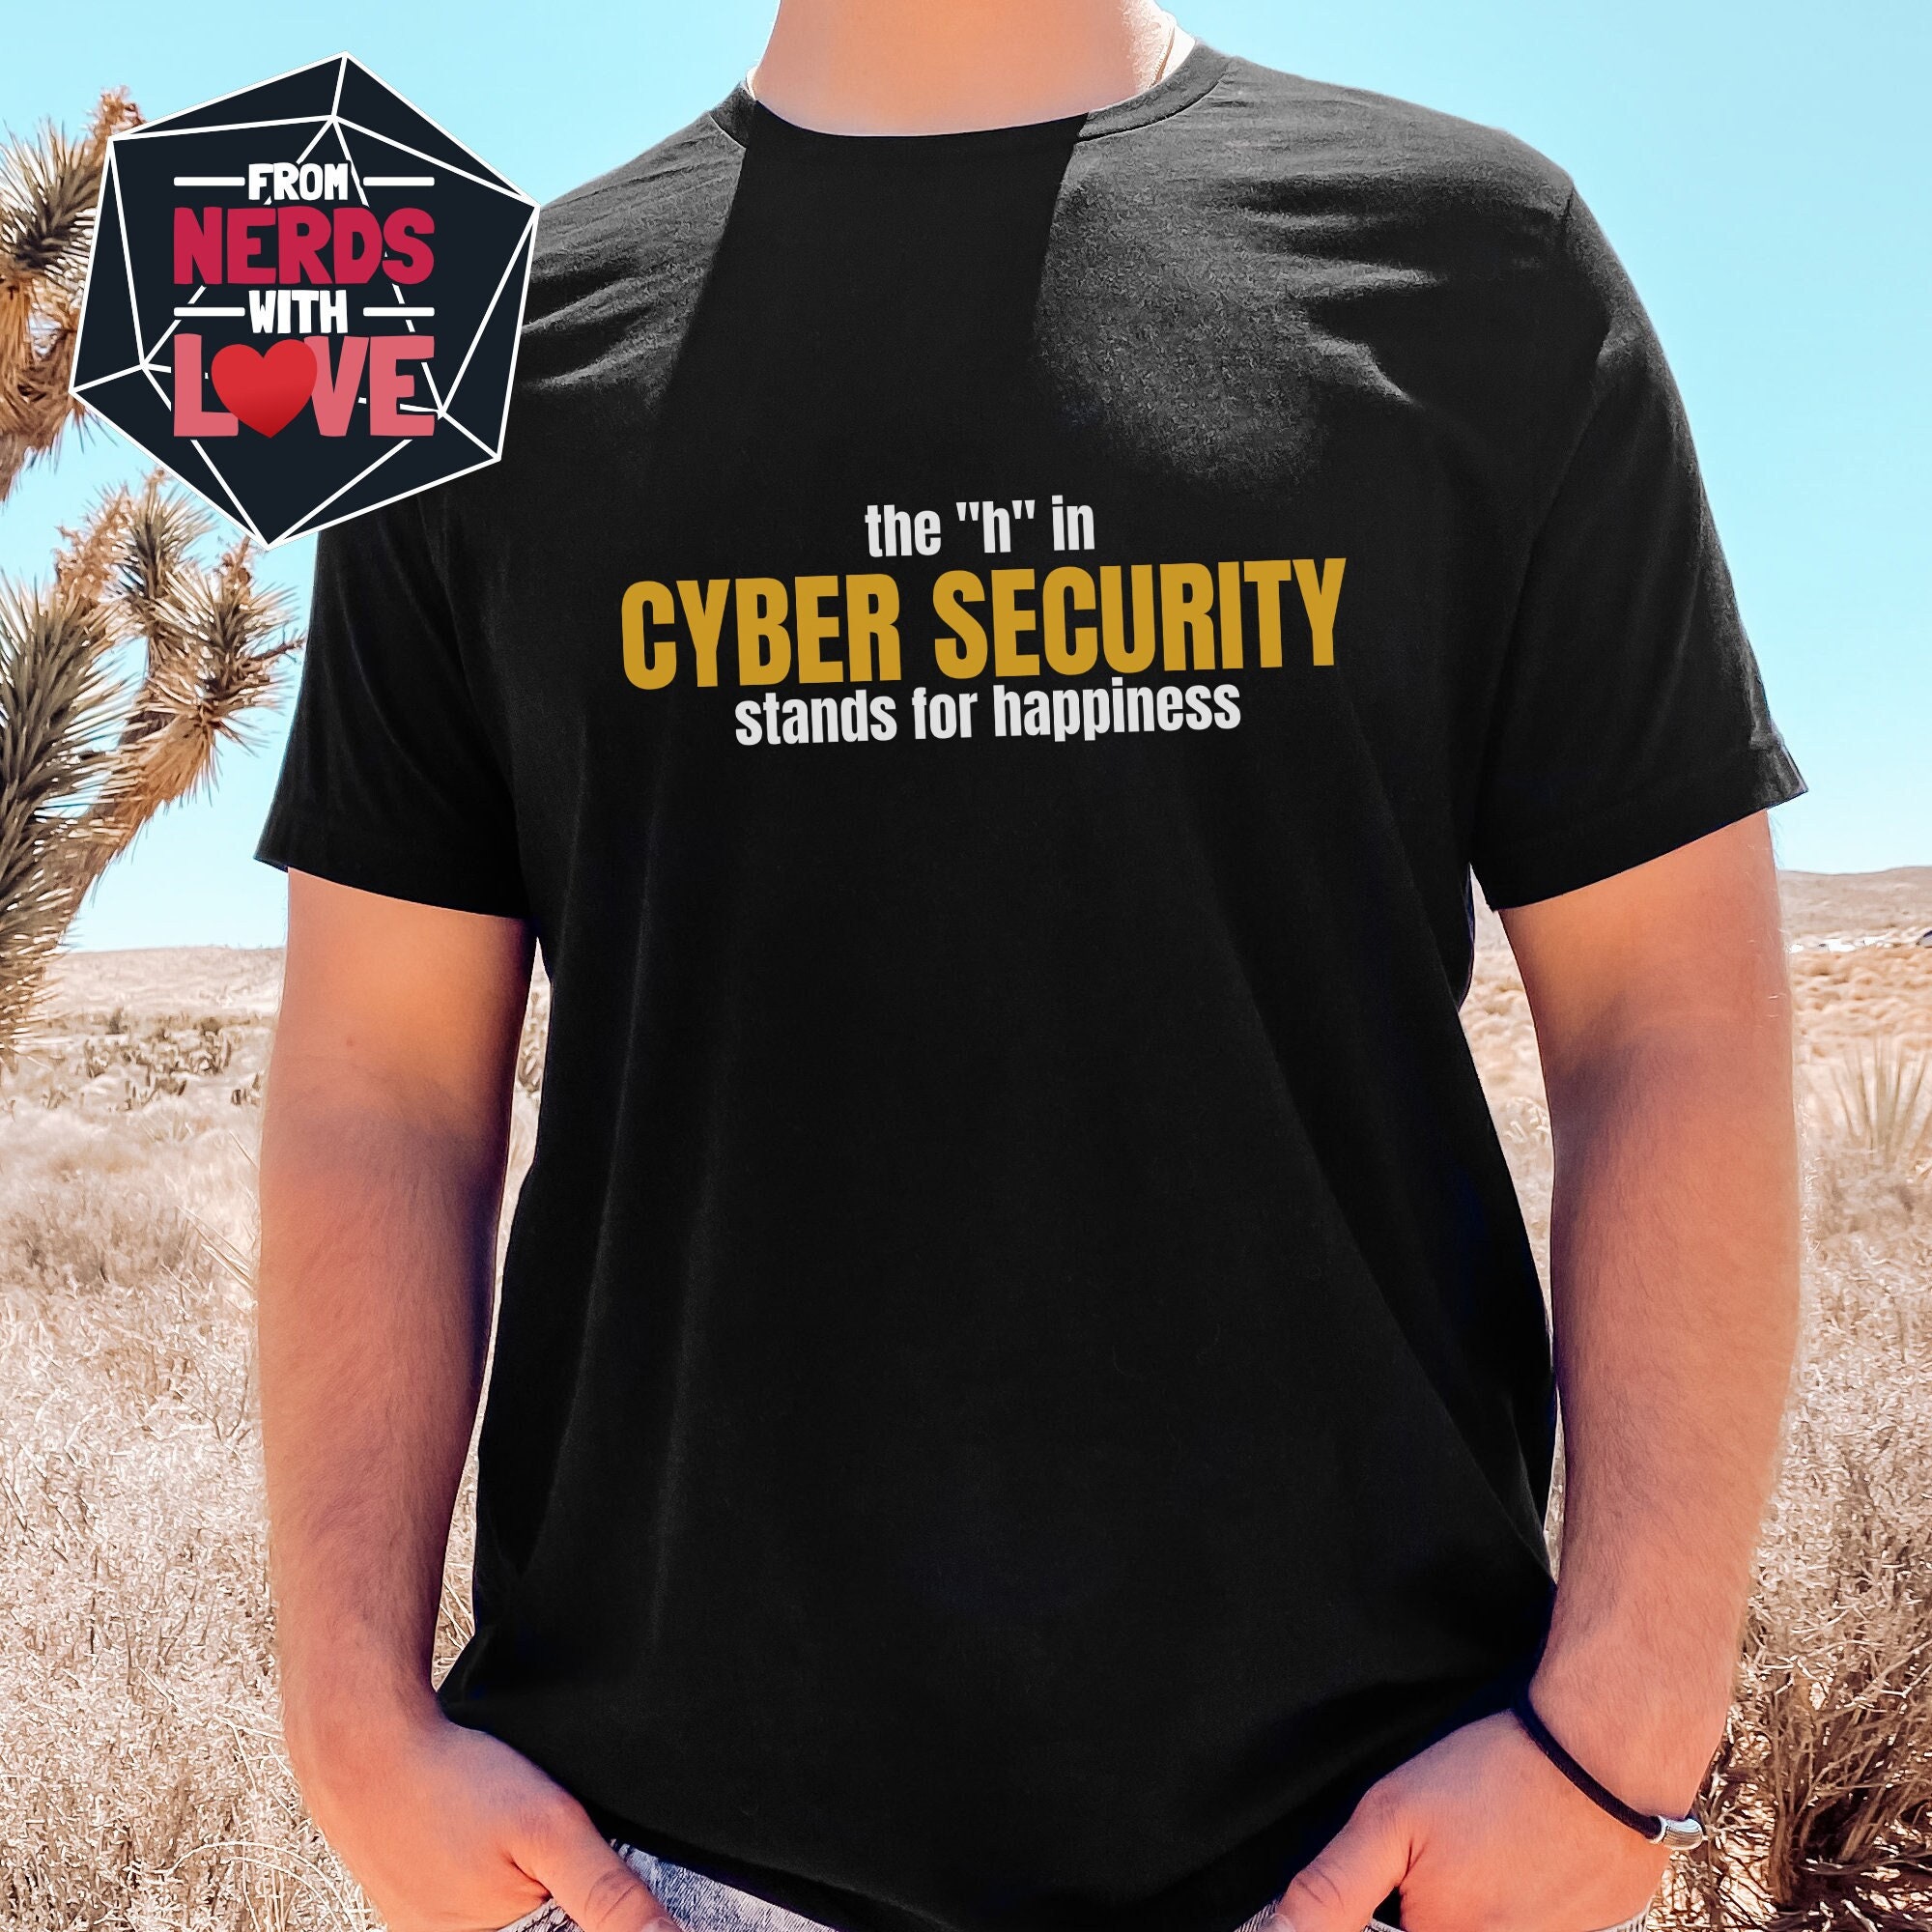 Security Chief Information Security Officer CISO - Etsy